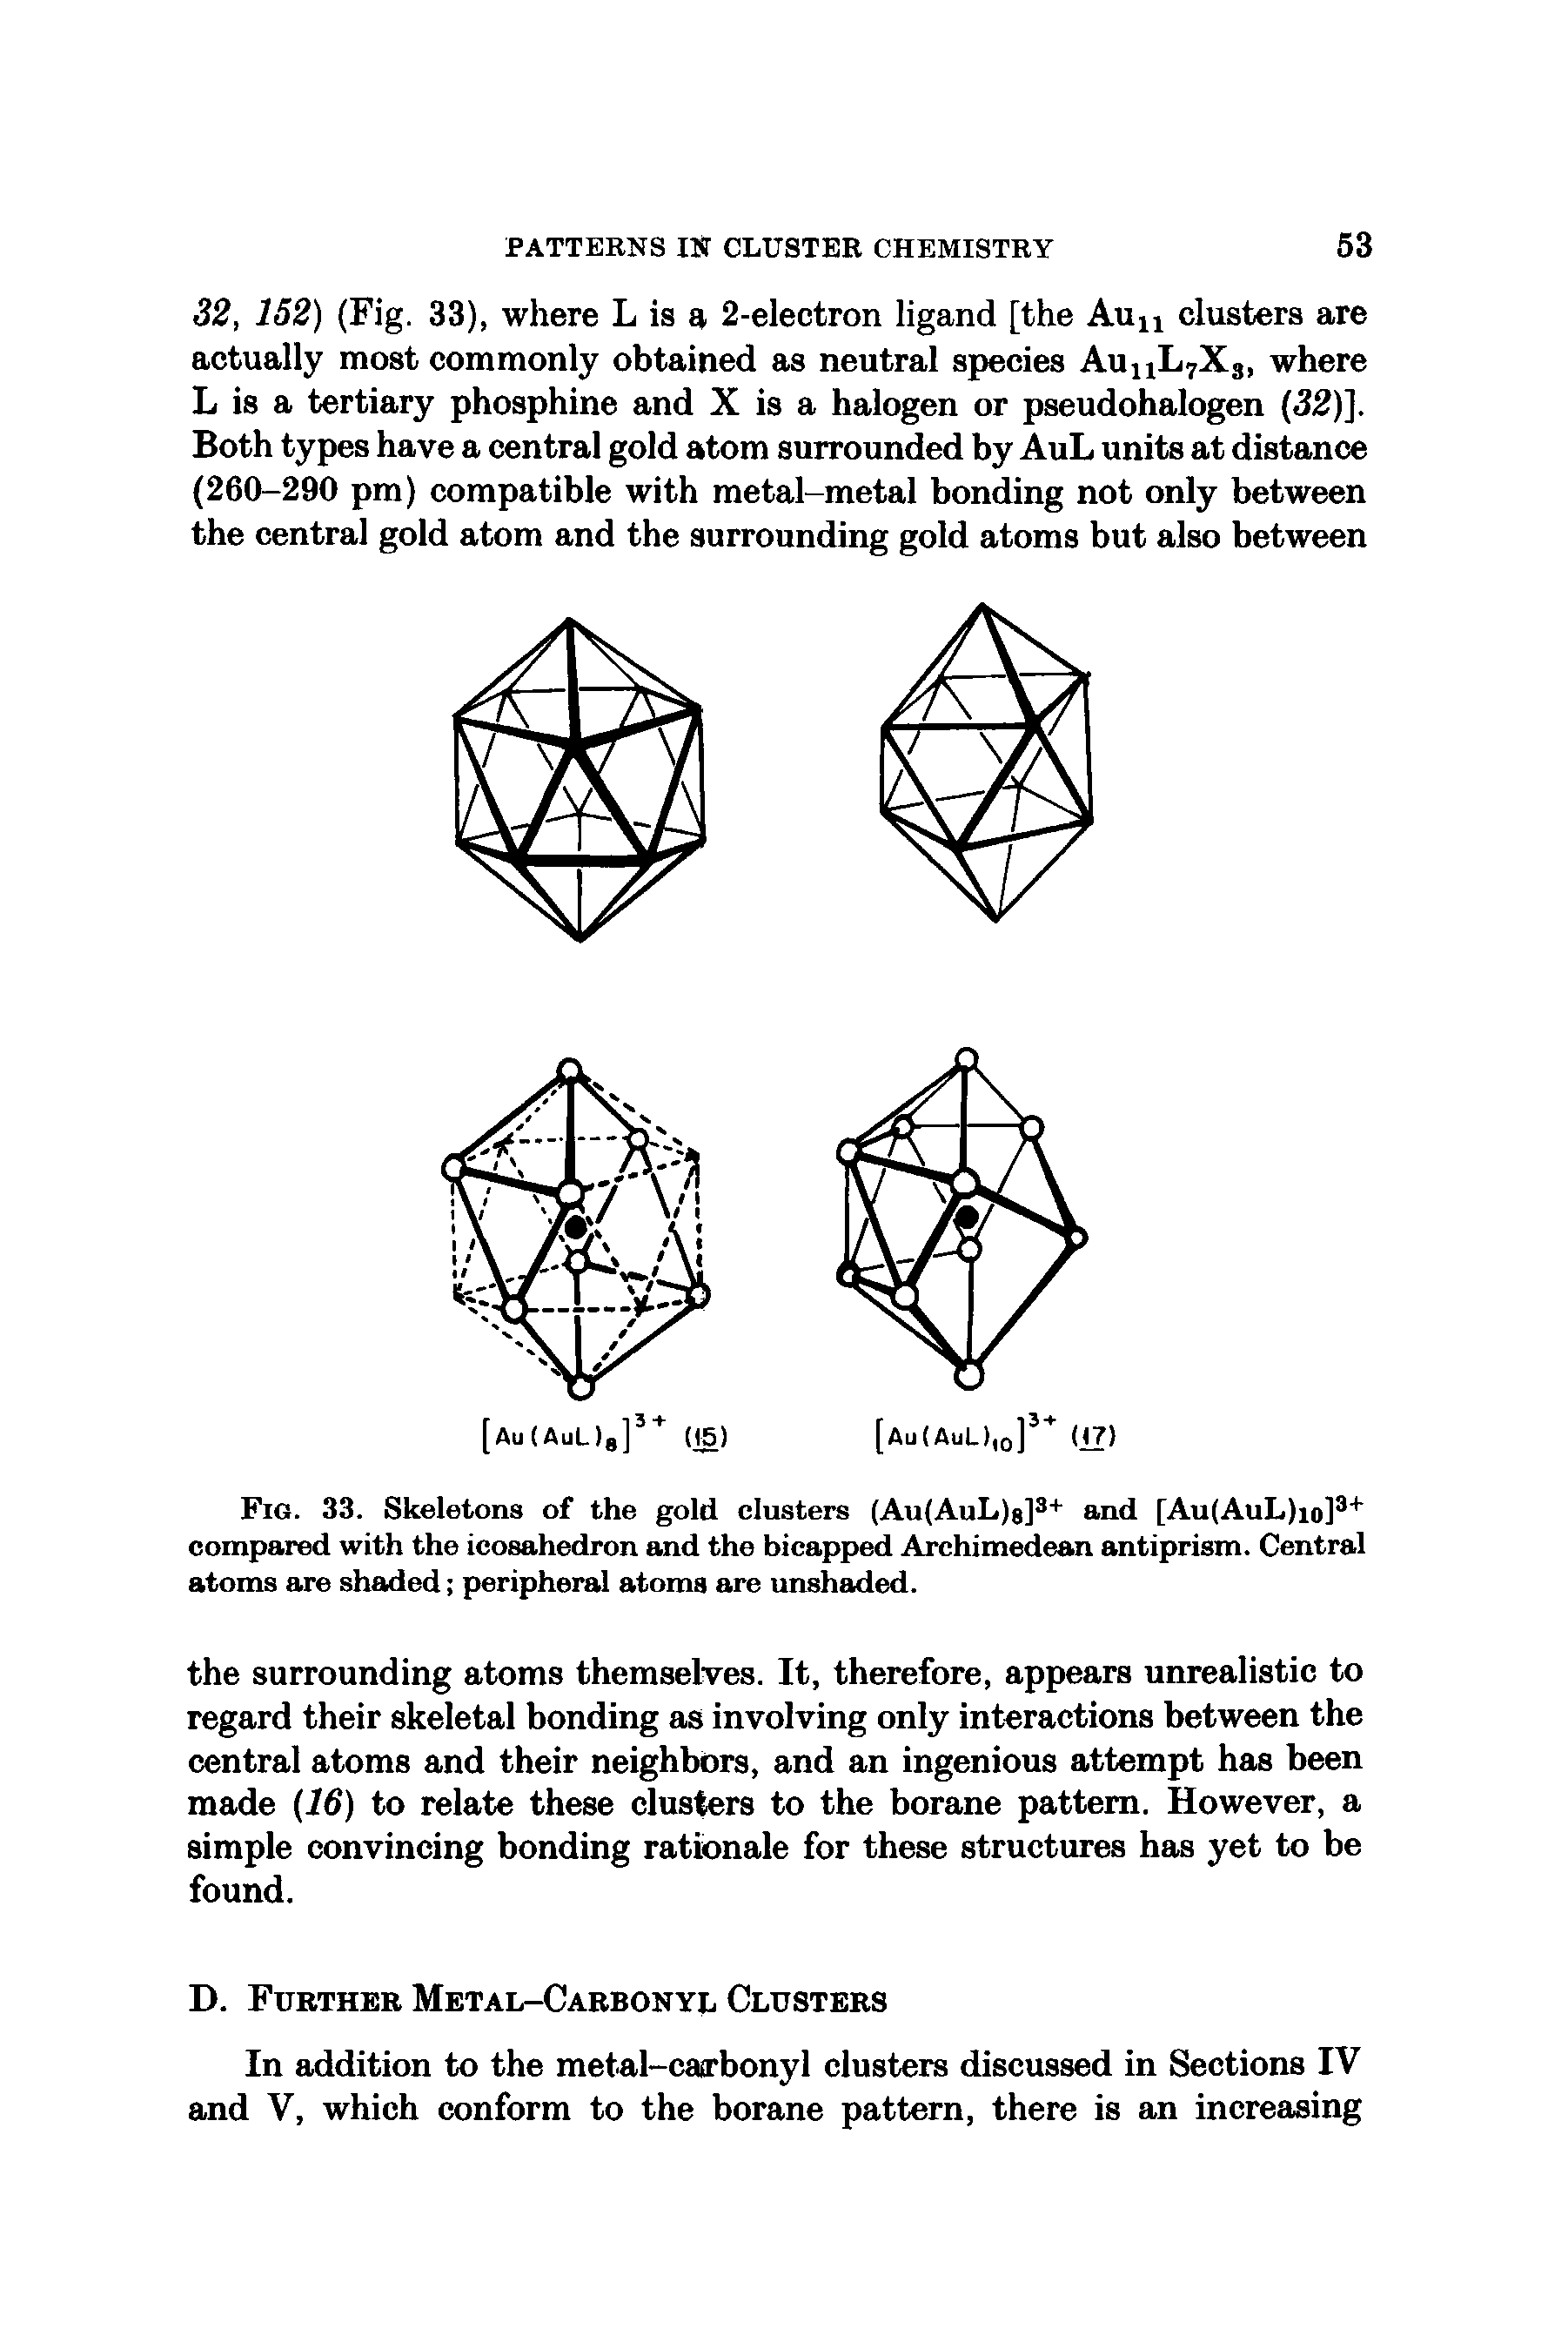 Fig. 33. Skeletons of the gold clusters (Au(AuL)8] and [Au(AuL)io] compared with the icosahedron and the bicapped Archimedean antiprism. Central atoms are shaded peripheral atoms are unshaded.